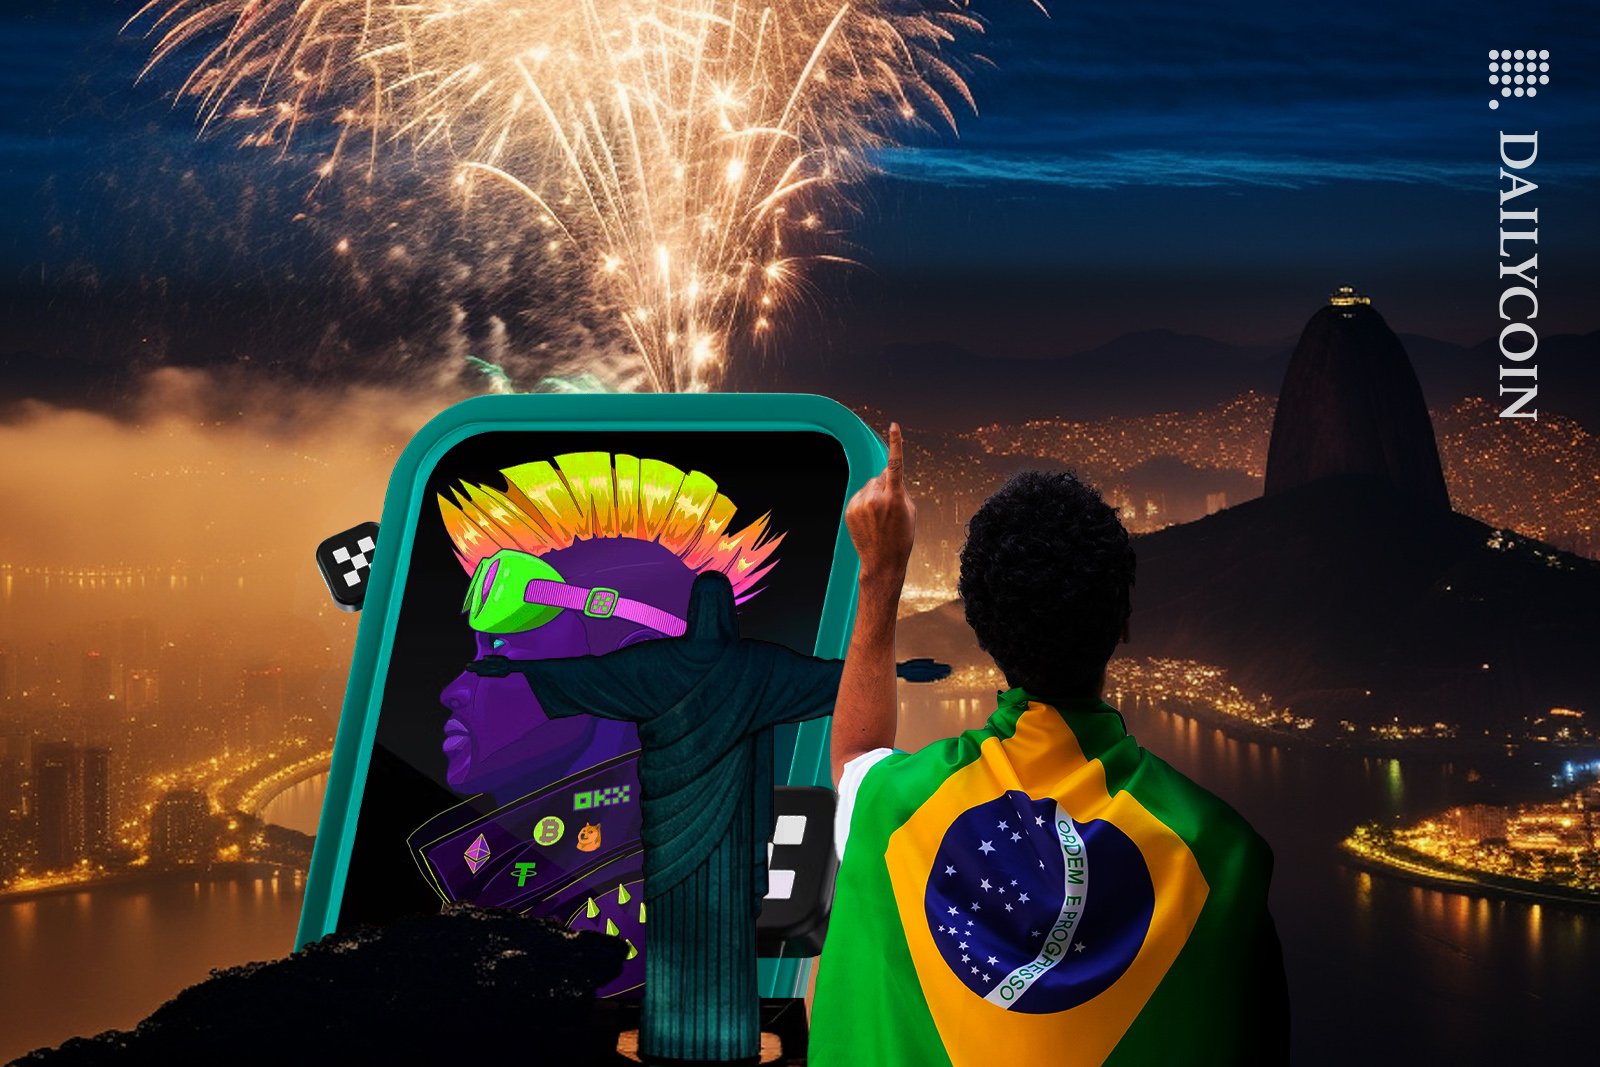 OKX mobile app showing up in Brazil with fireworks.